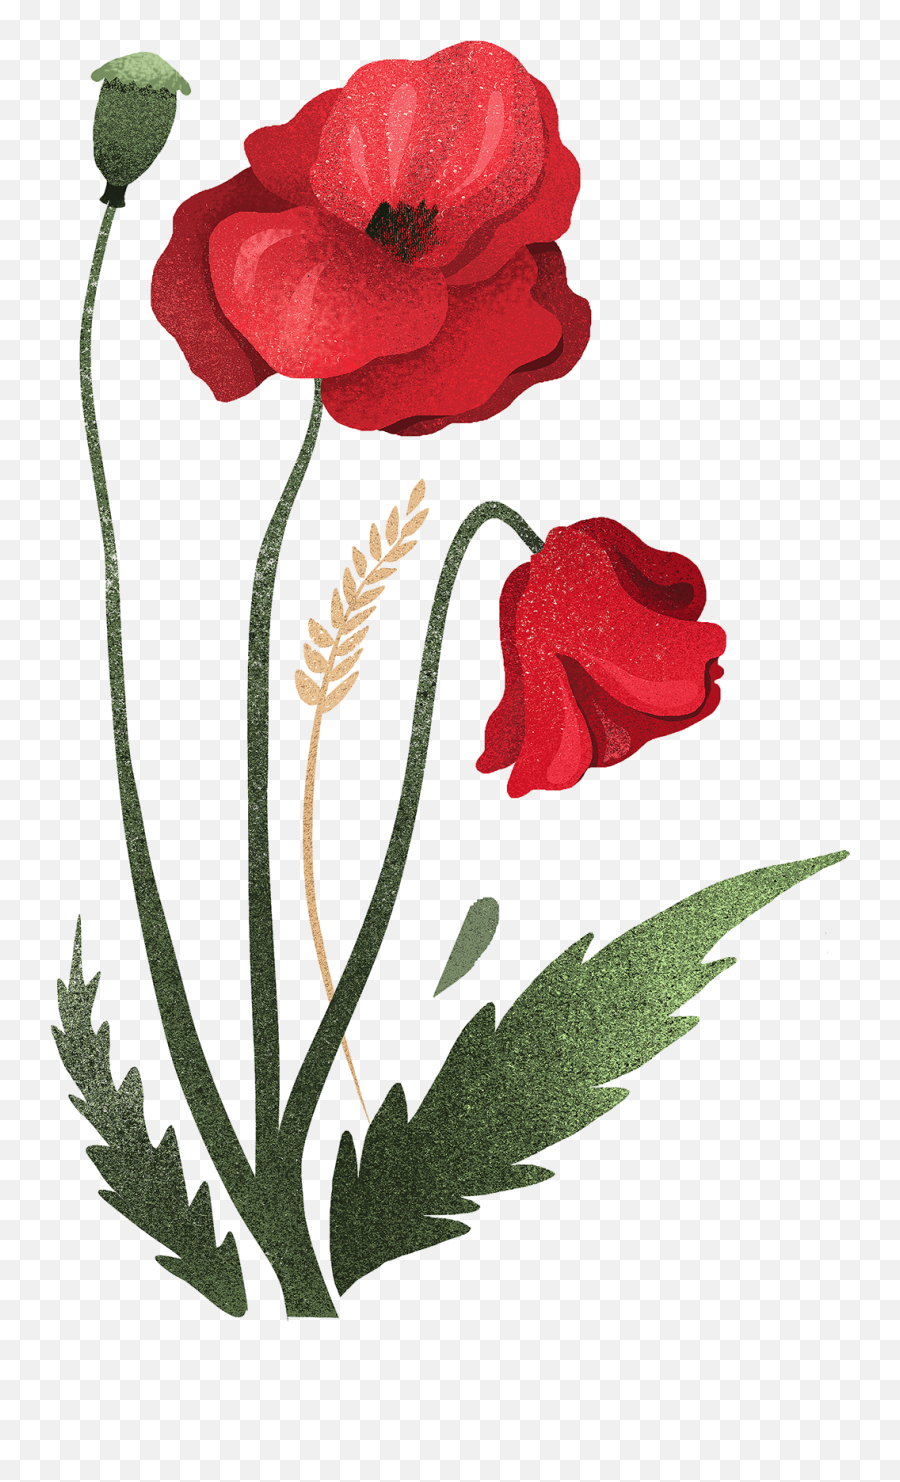 Download Hd Save To Collection - Corn Poppy Transparent Png Emoji,Poppy Png